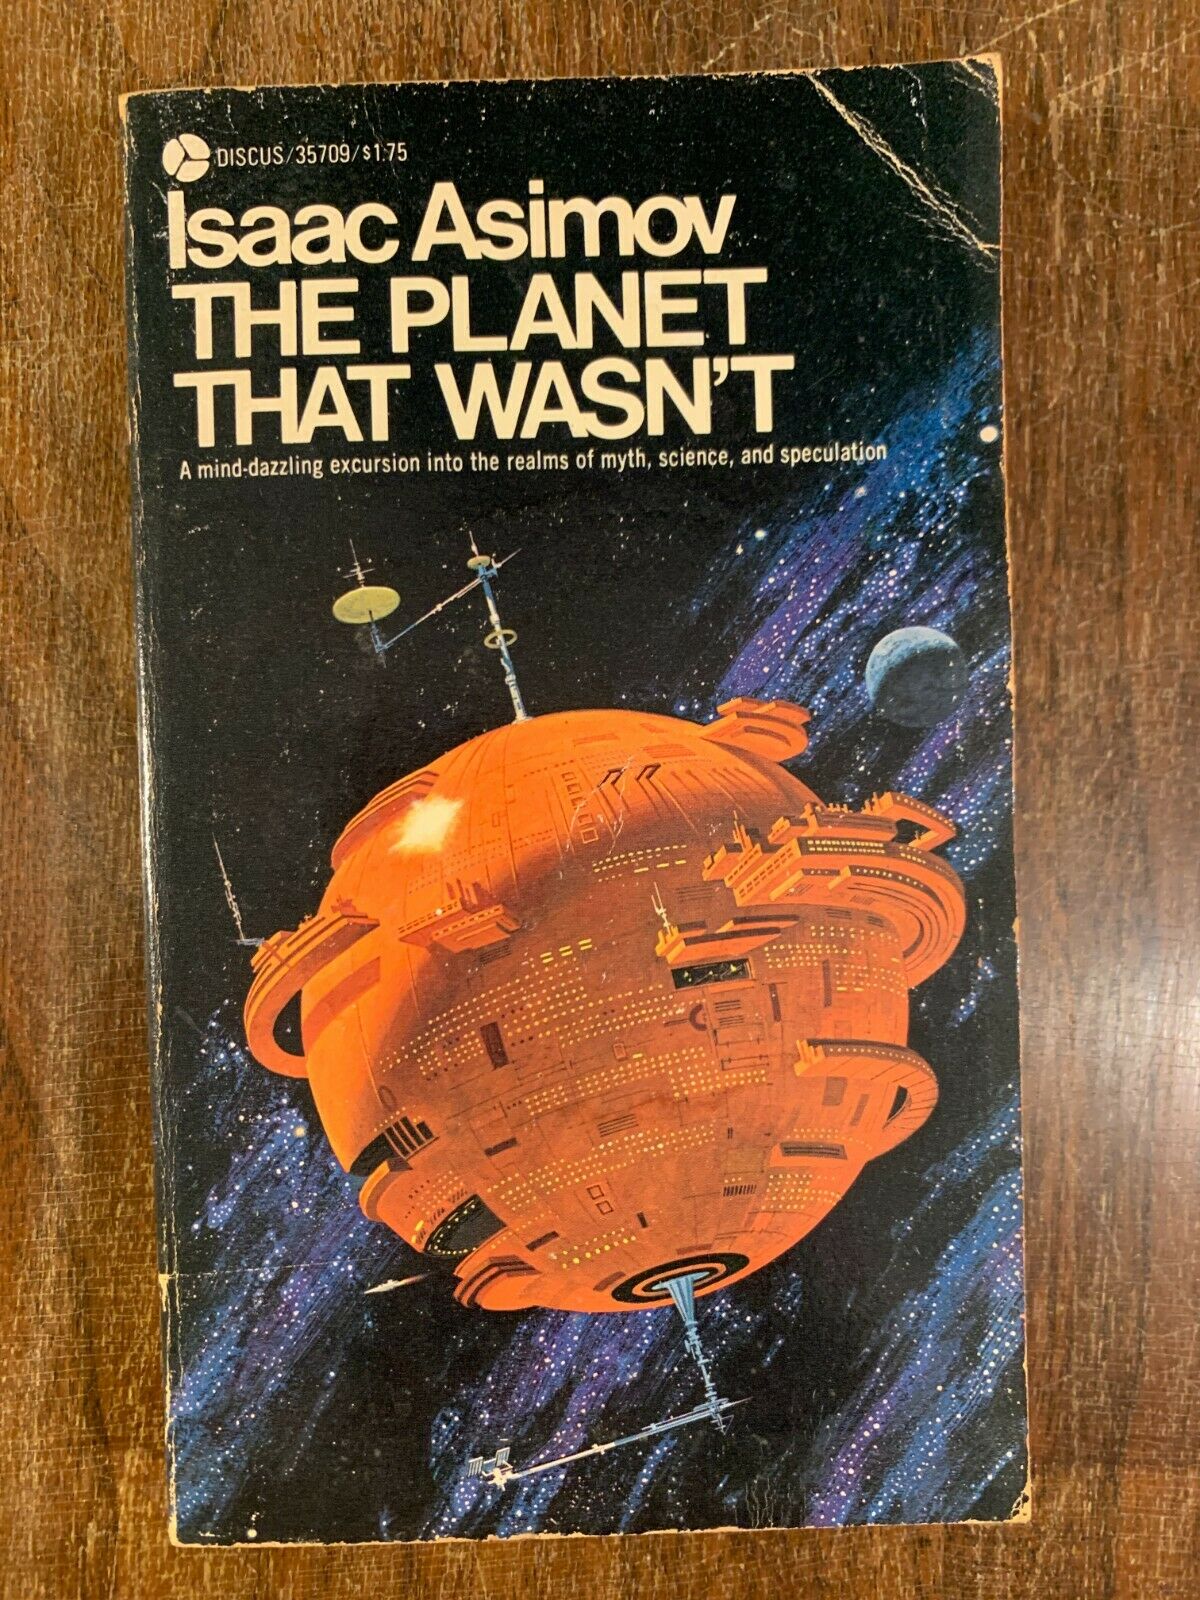 The Planet That Wasn't, Isaac Asimov, 1st Printing, DISCUS EDITION 4B